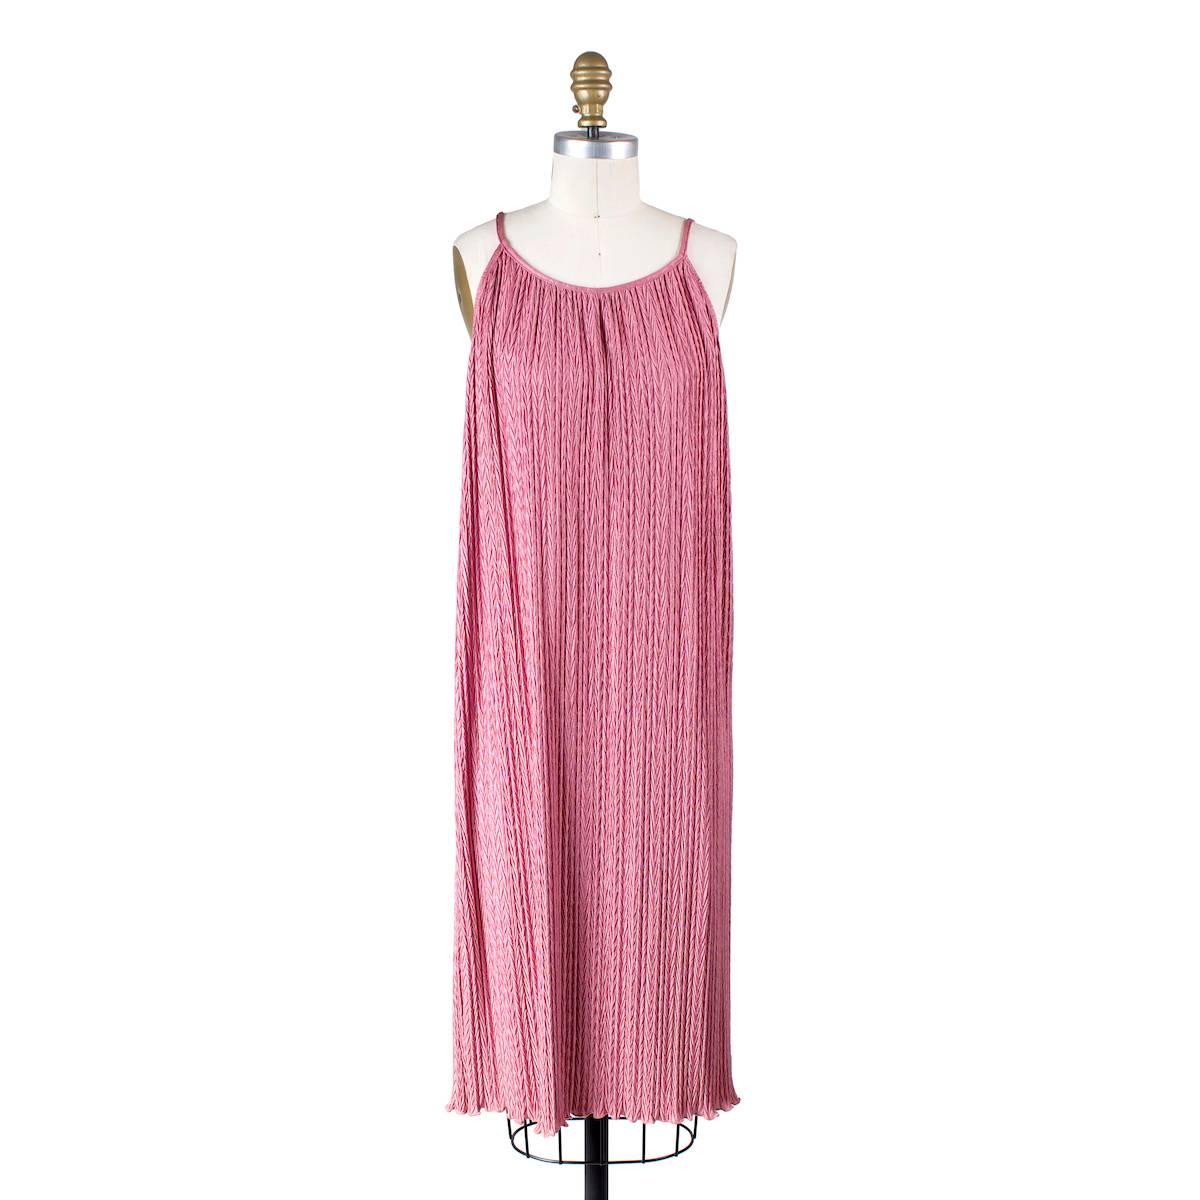 Rose pink dress by Mary McFadden.  Features crinkled texture and separate matching rope belt to tie around waist.